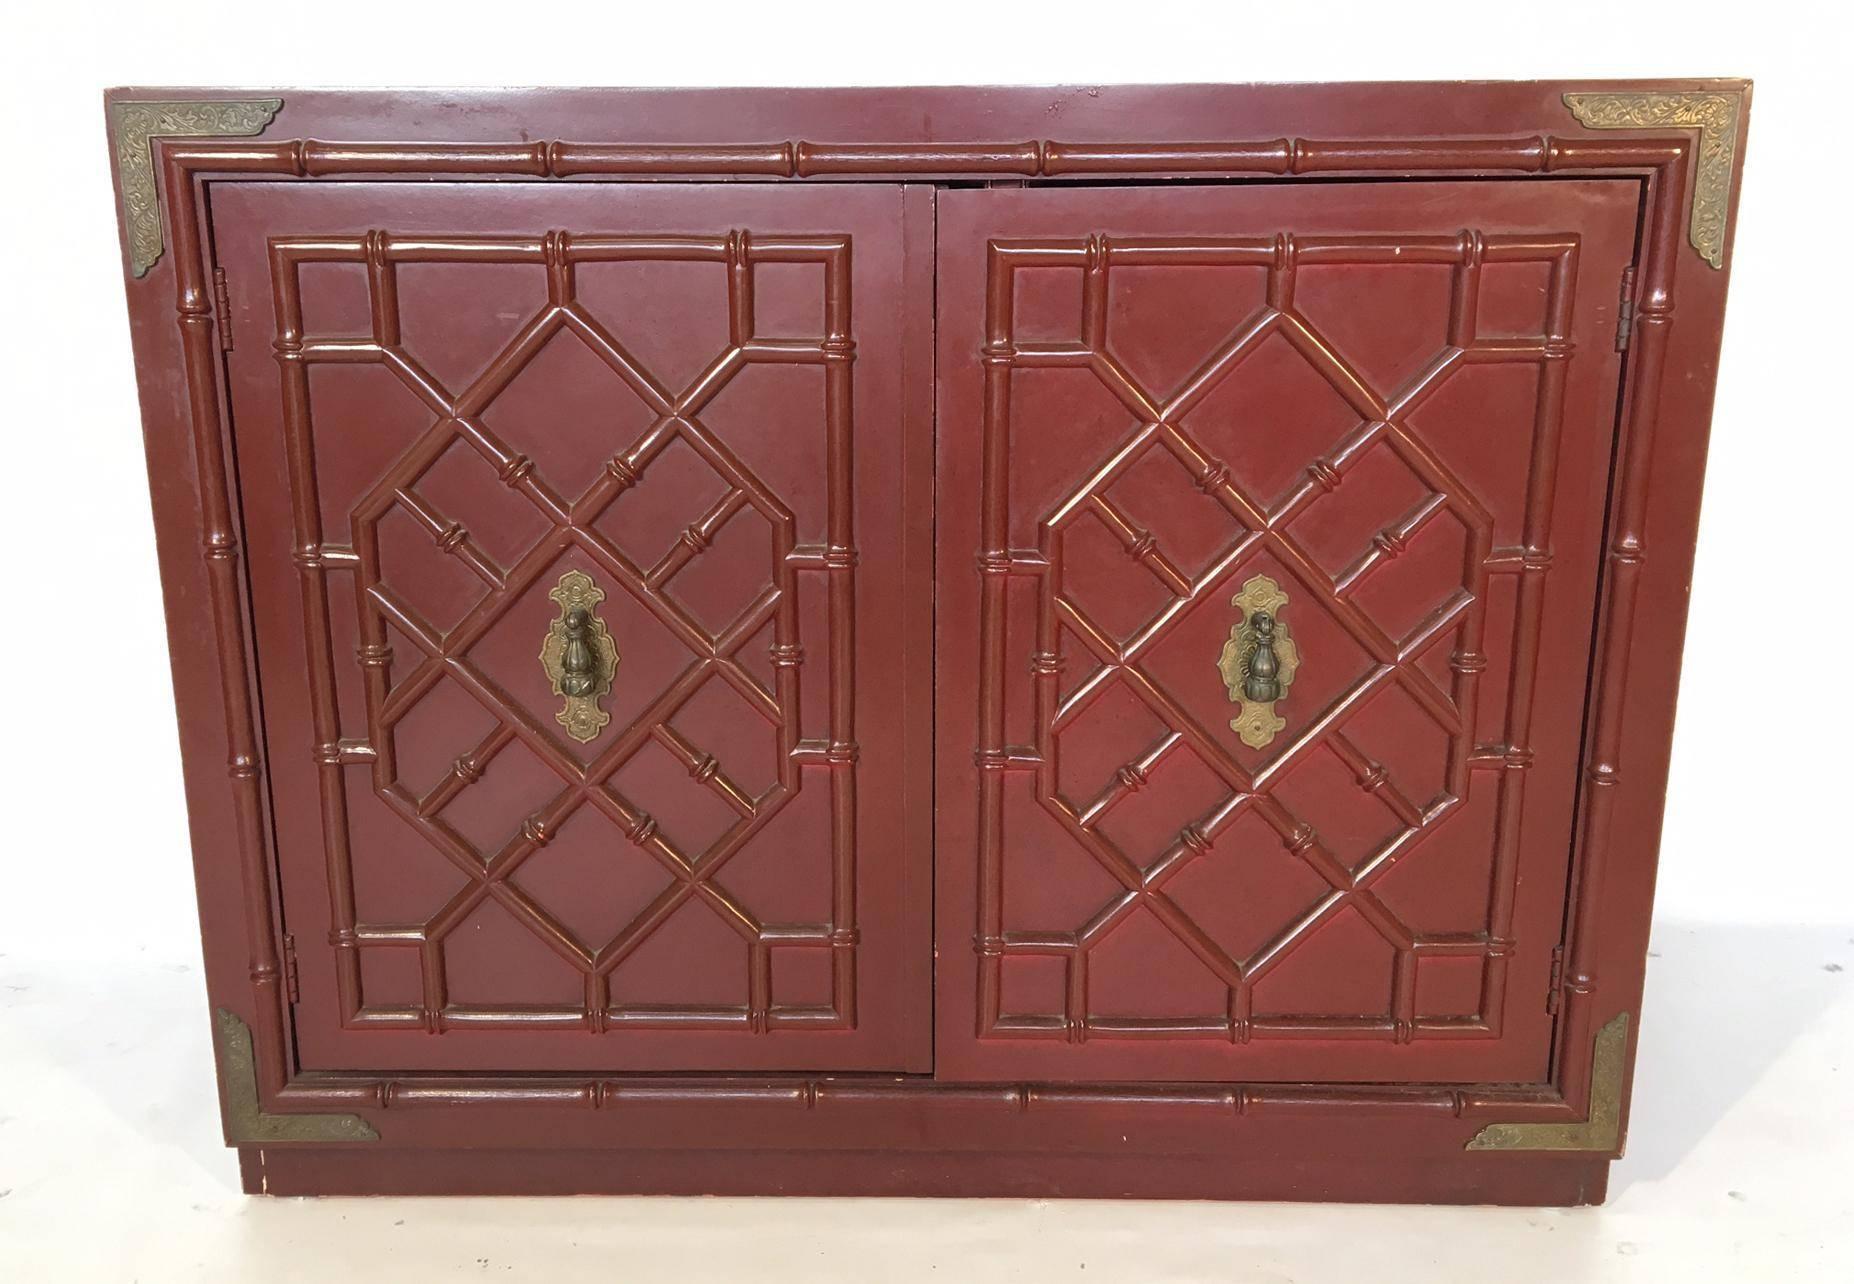 Faux bamboo cabinet in deep oxblood red featuring brass hardware and detailing. Doors reveal storage space with large drawer. Good vintage condition with minor abrasions consistent with age.
As always, all reasonable offers will be considered.